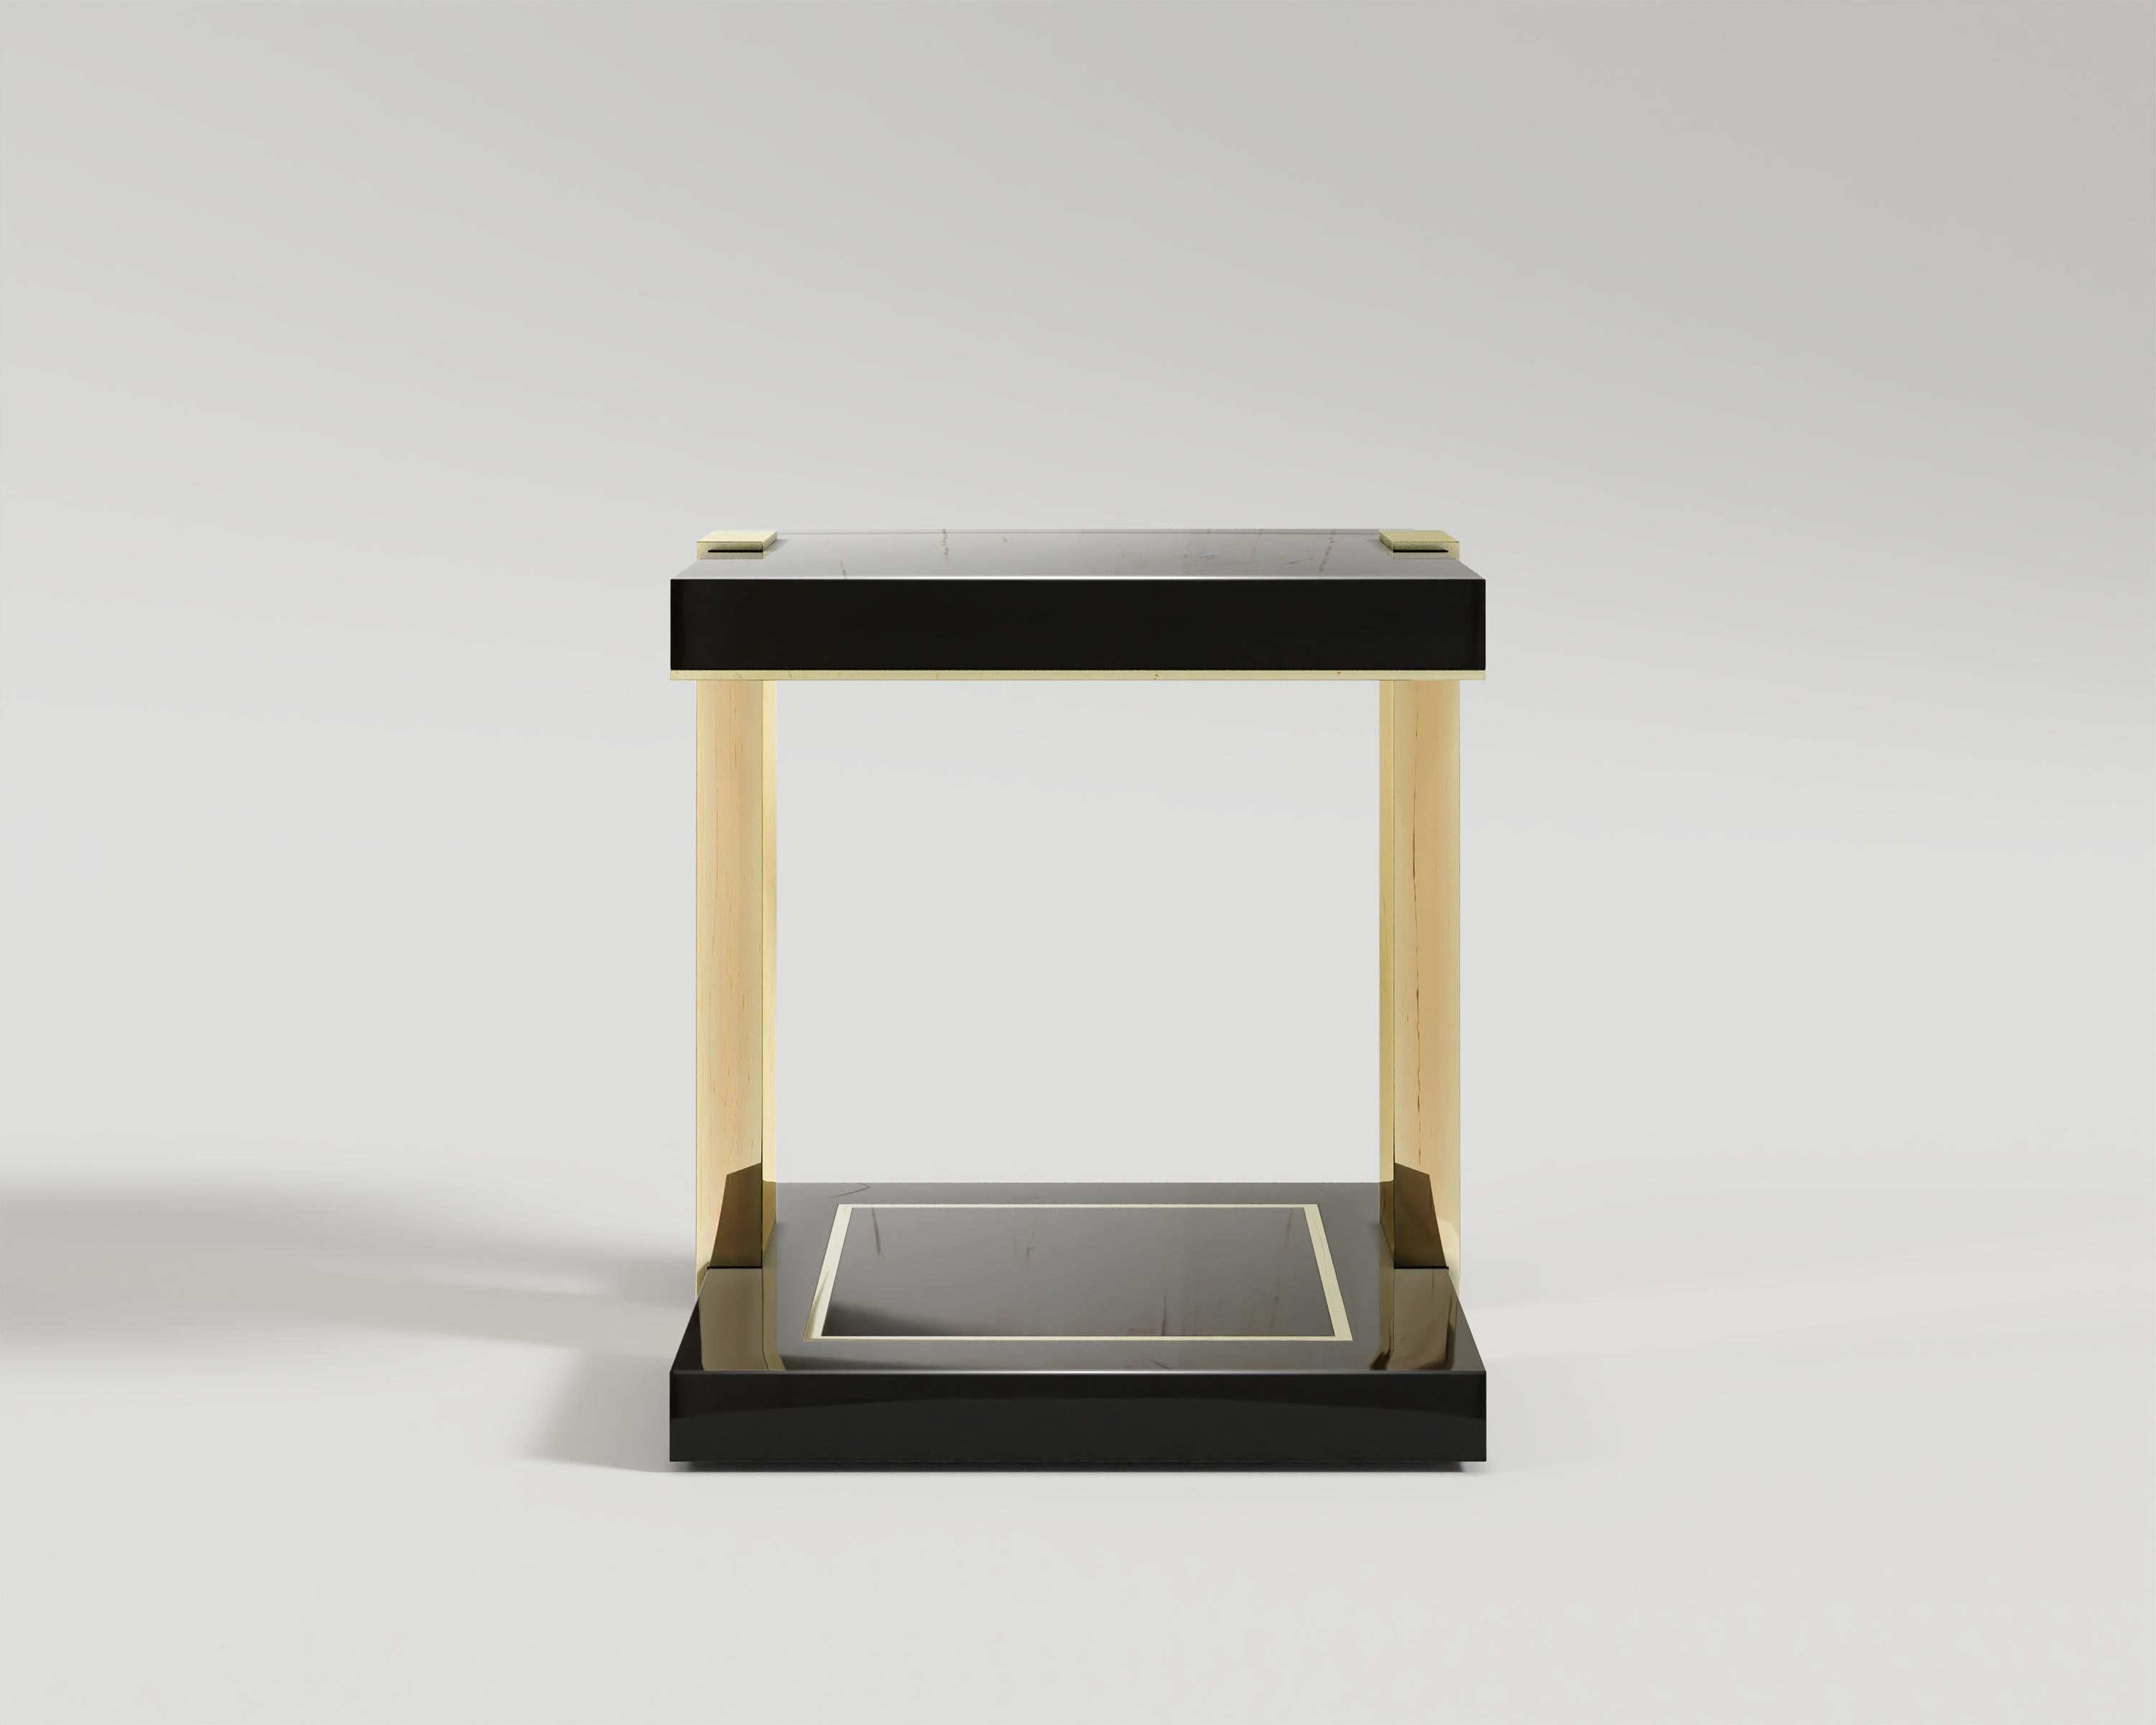 Twin Side Table
Two sections of a high gloss lacquer and polished bronze. The color contrasts result in harmonious synergy.

Materials and sizes are customizable upon the customer's personal request.

Designed by Palena Furniture.